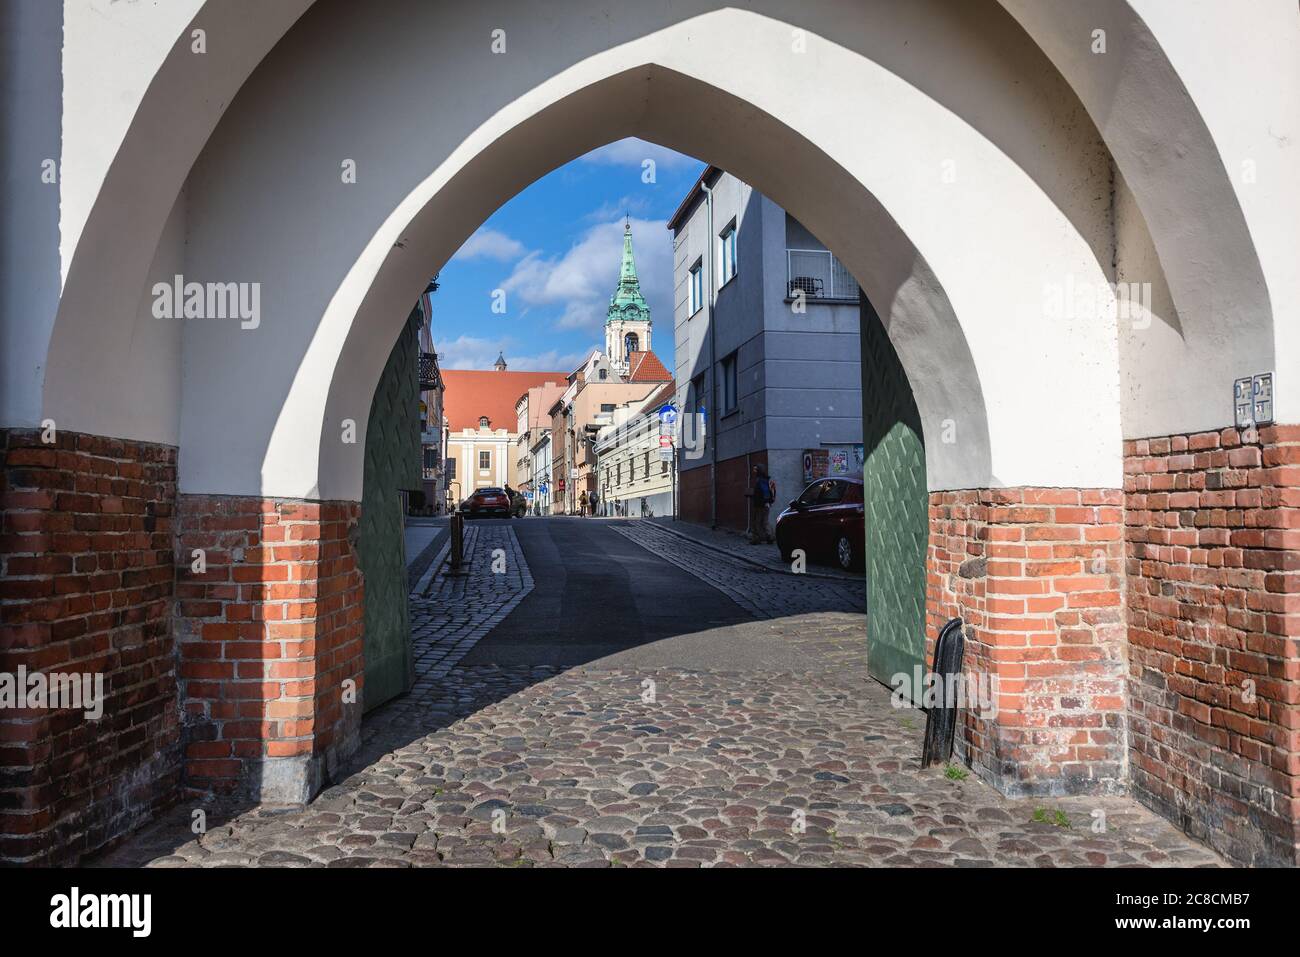 Monastery Gate also called Gate of the Holy Spirit or the Gate of the Lady on Old Town of Torun, Kuyavian Pomeranian Voivodeship of Poland Stock Photo